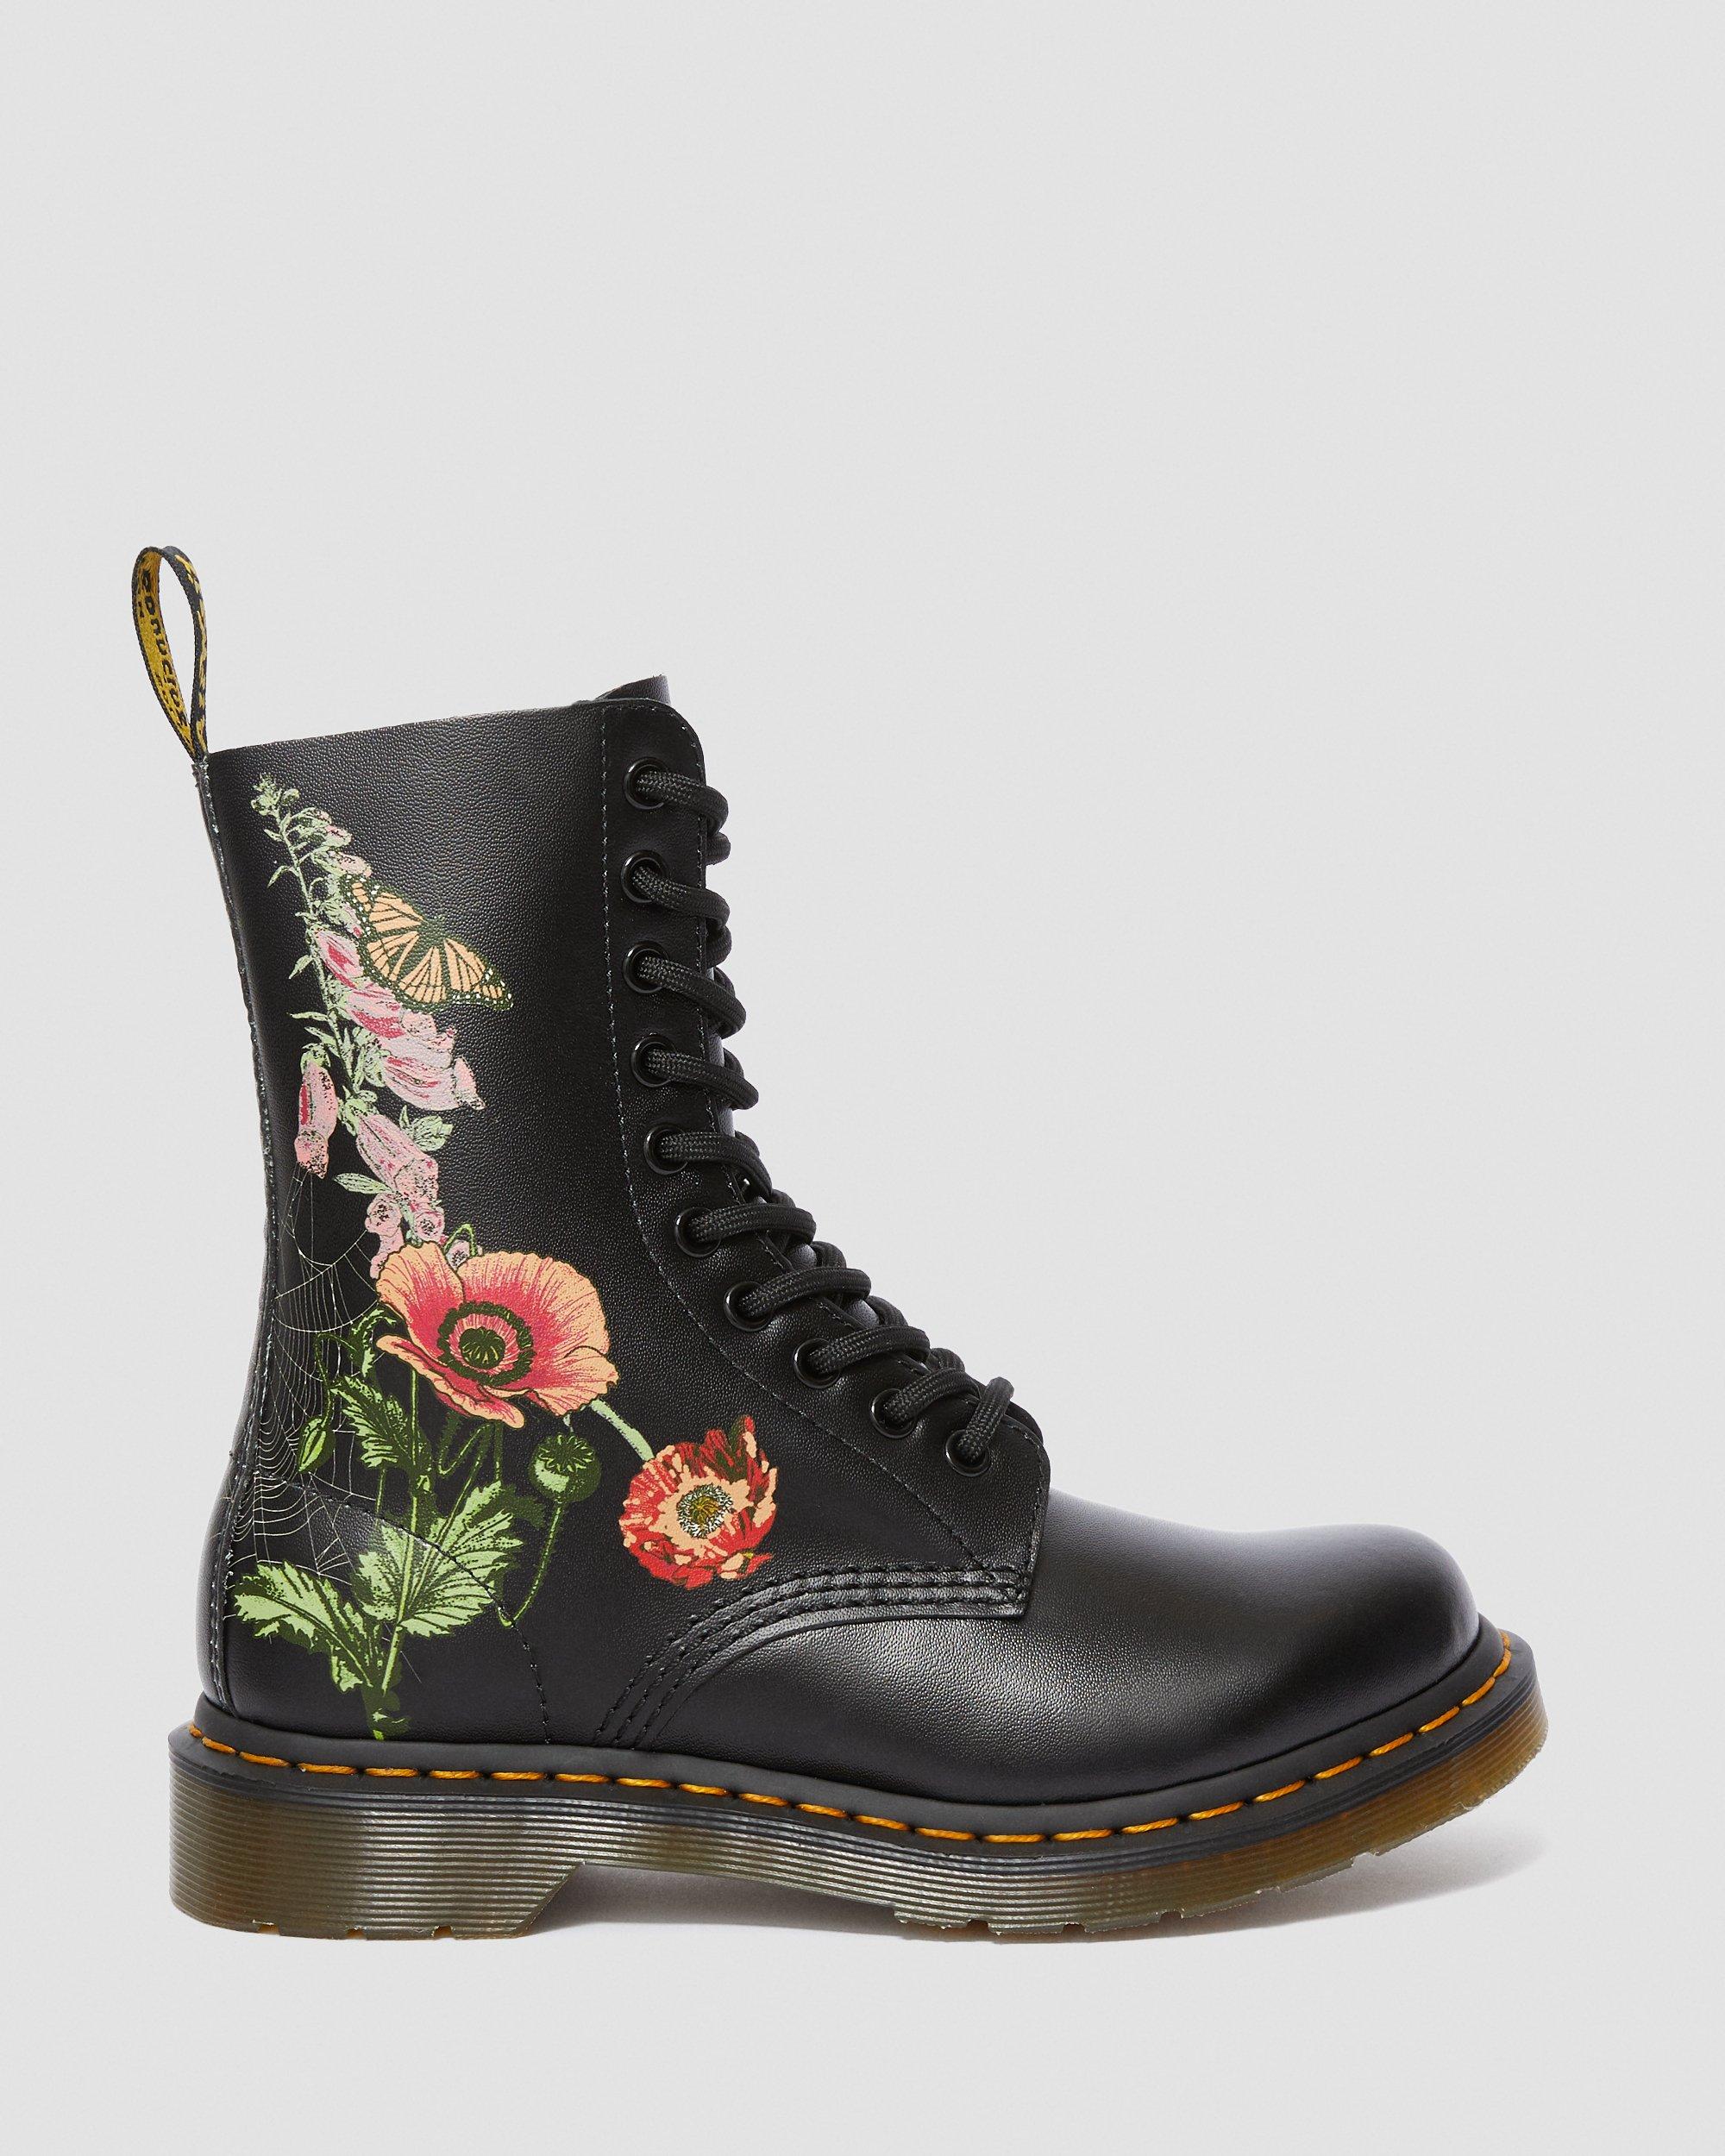 1490 WILD BOTANICS FLORAL HIGH BOOTS in Multi